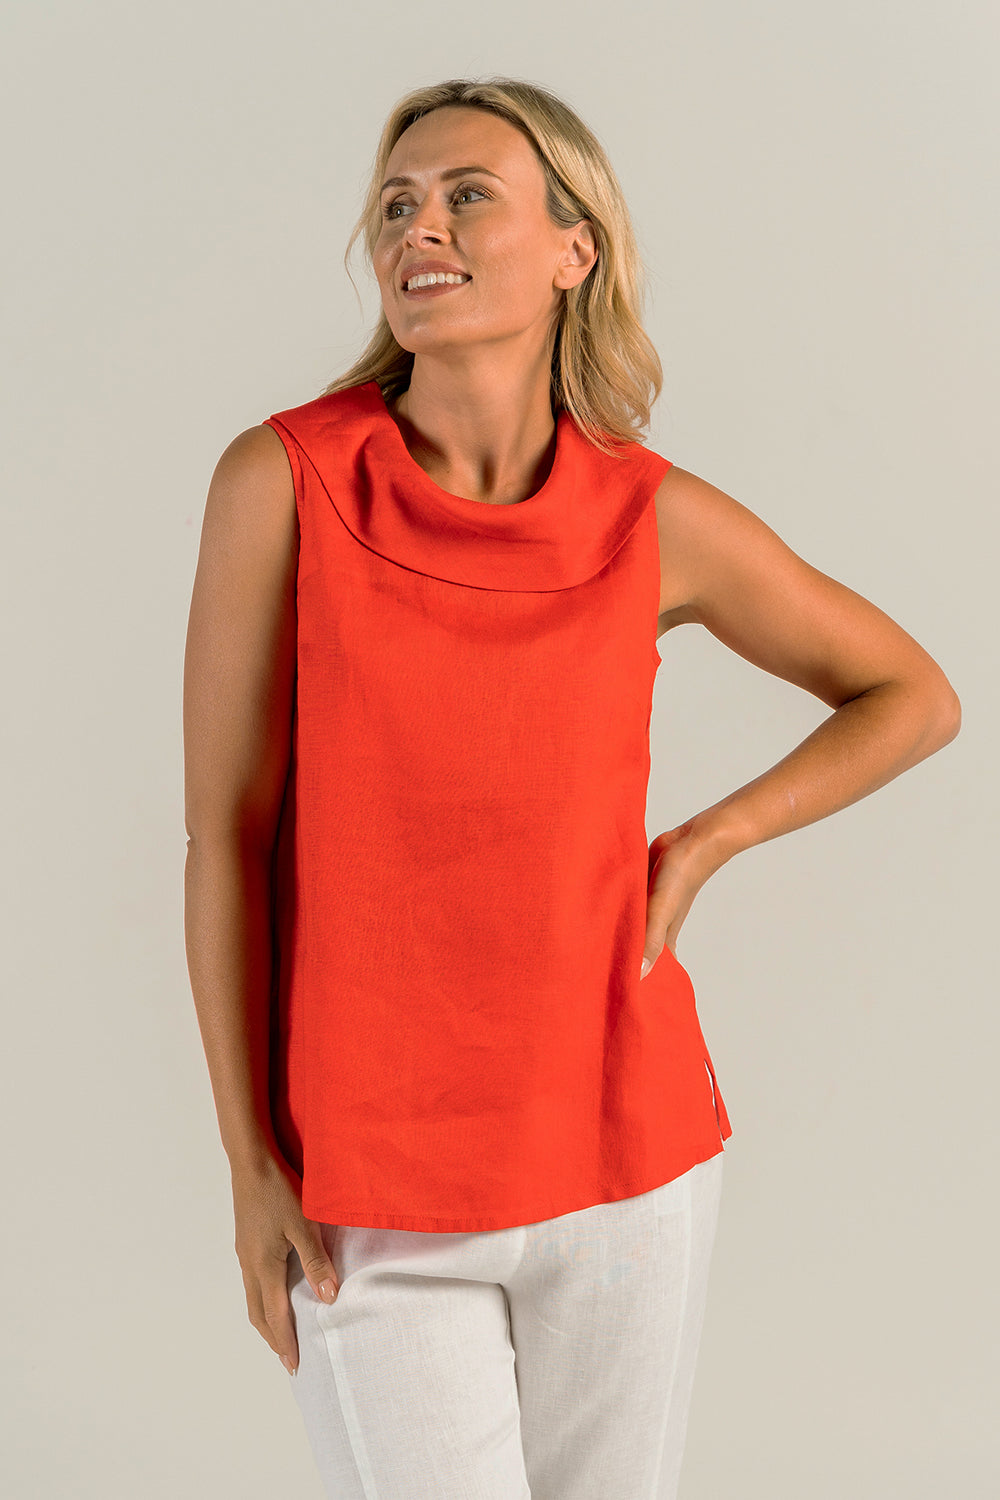 Woman wearing a Cowl Neck top in red by See Saw, sold and shipped from Pizazz Boutique Nelson Bay online women's clothes shops Australia